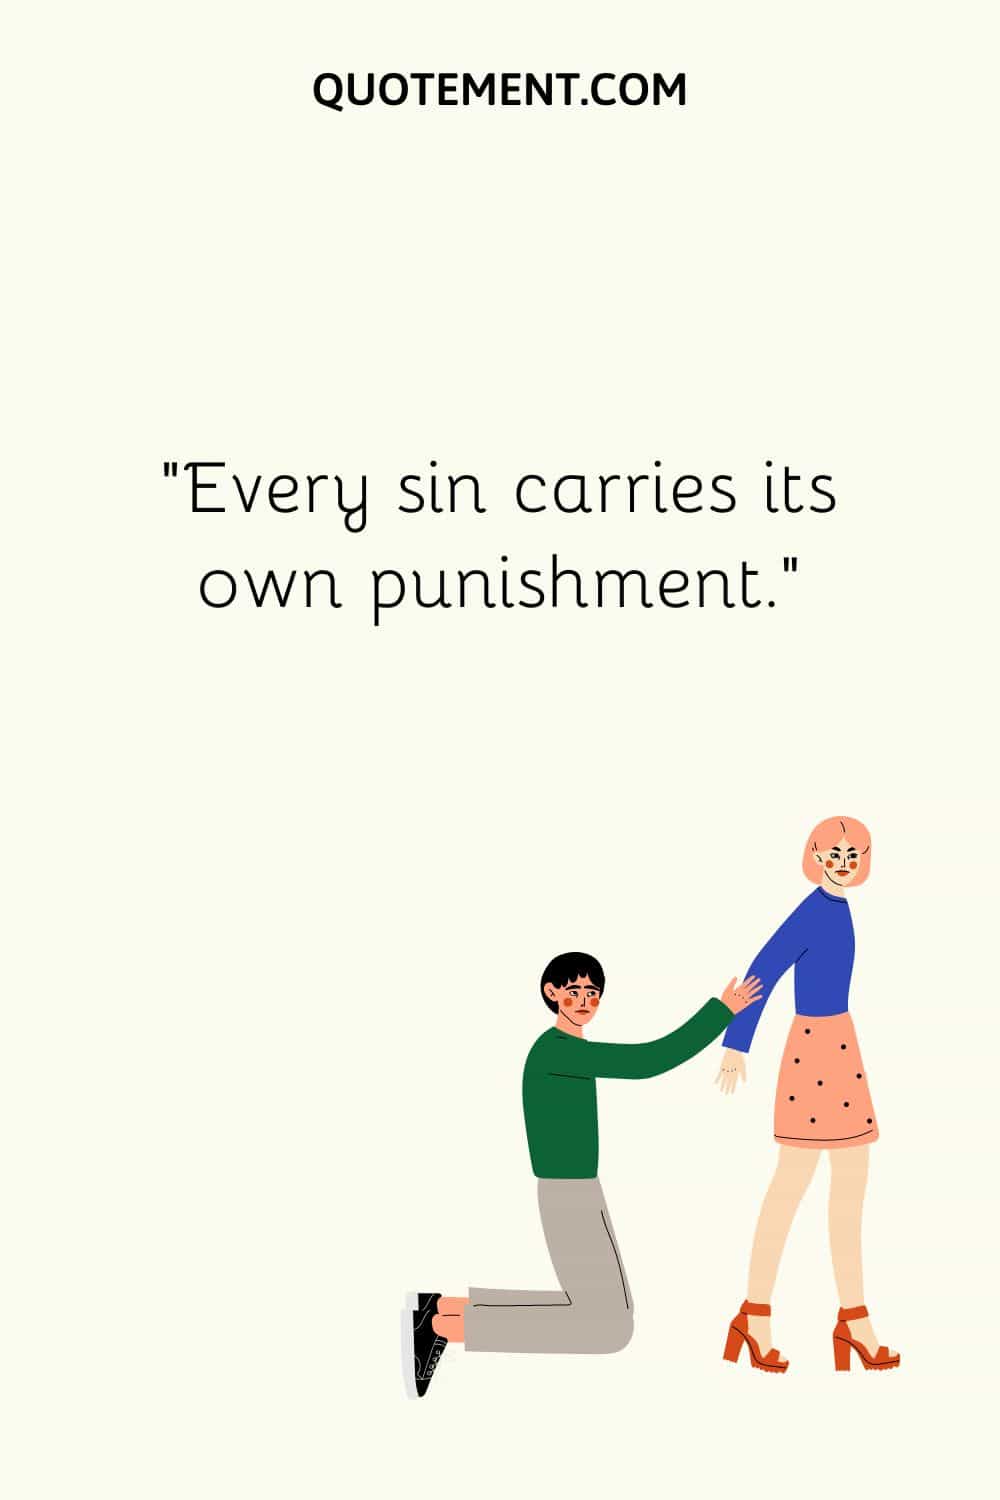 Every sin carries its own punishment